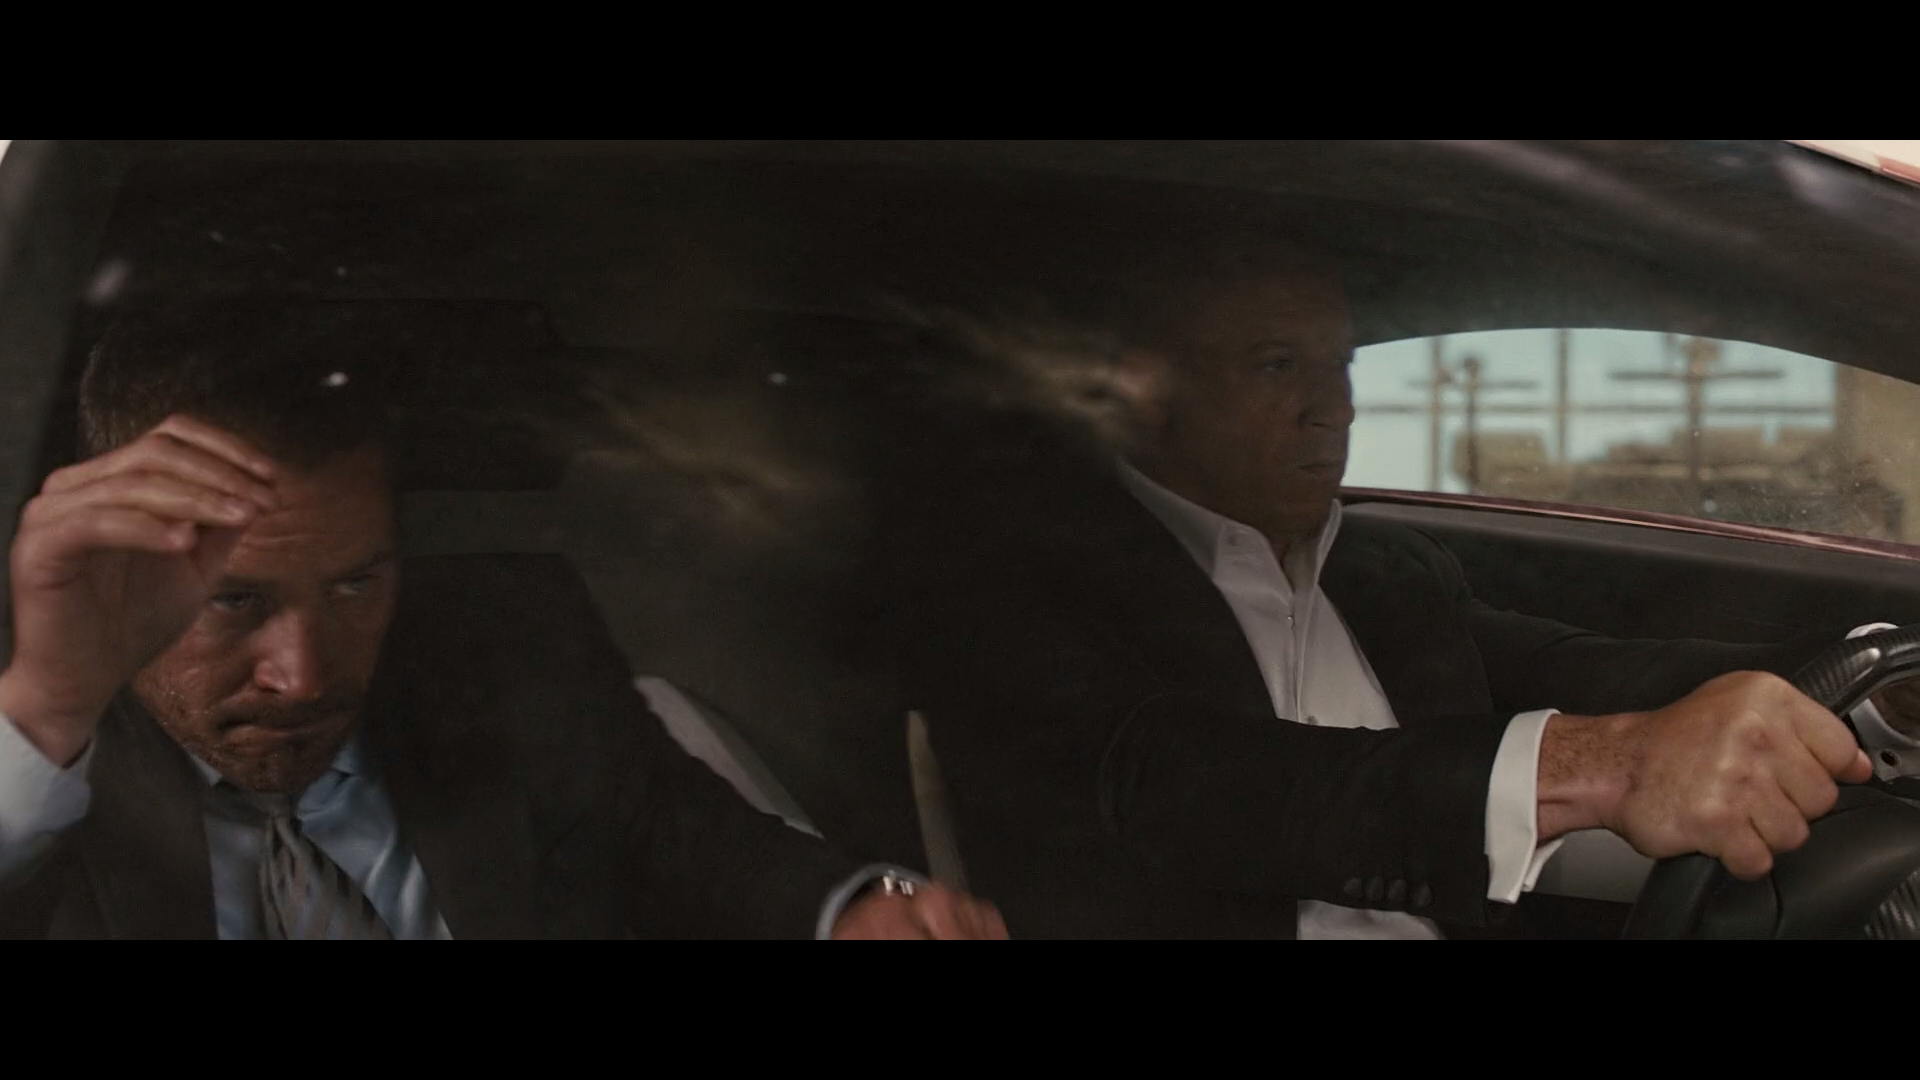 10 Scenes From Furious 7 That Used A Vfx Paul Walker And How They Did It 